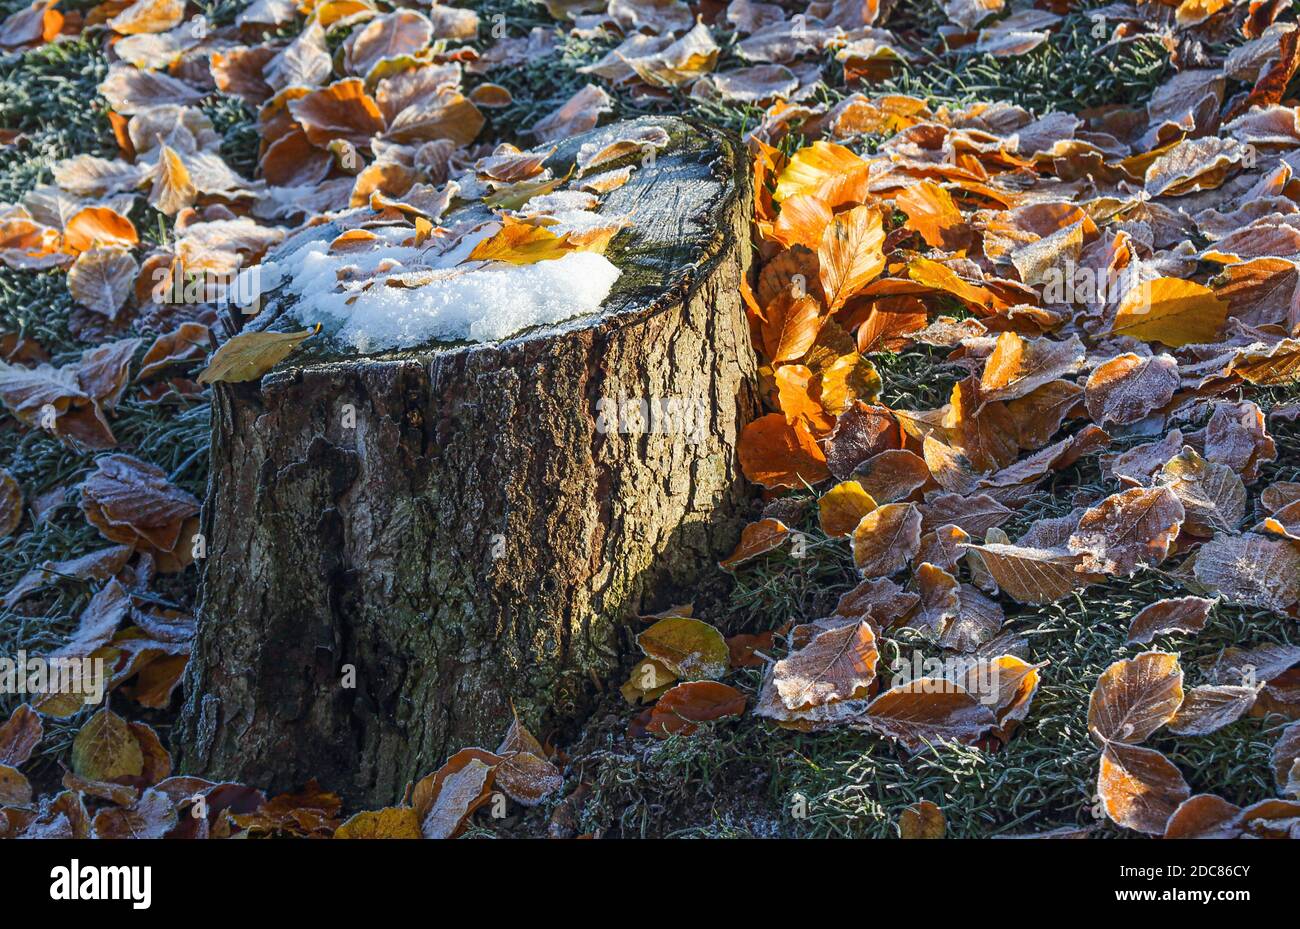 Tree stump in the snow. The colors of the foliage shone beautifully. Stock Photo